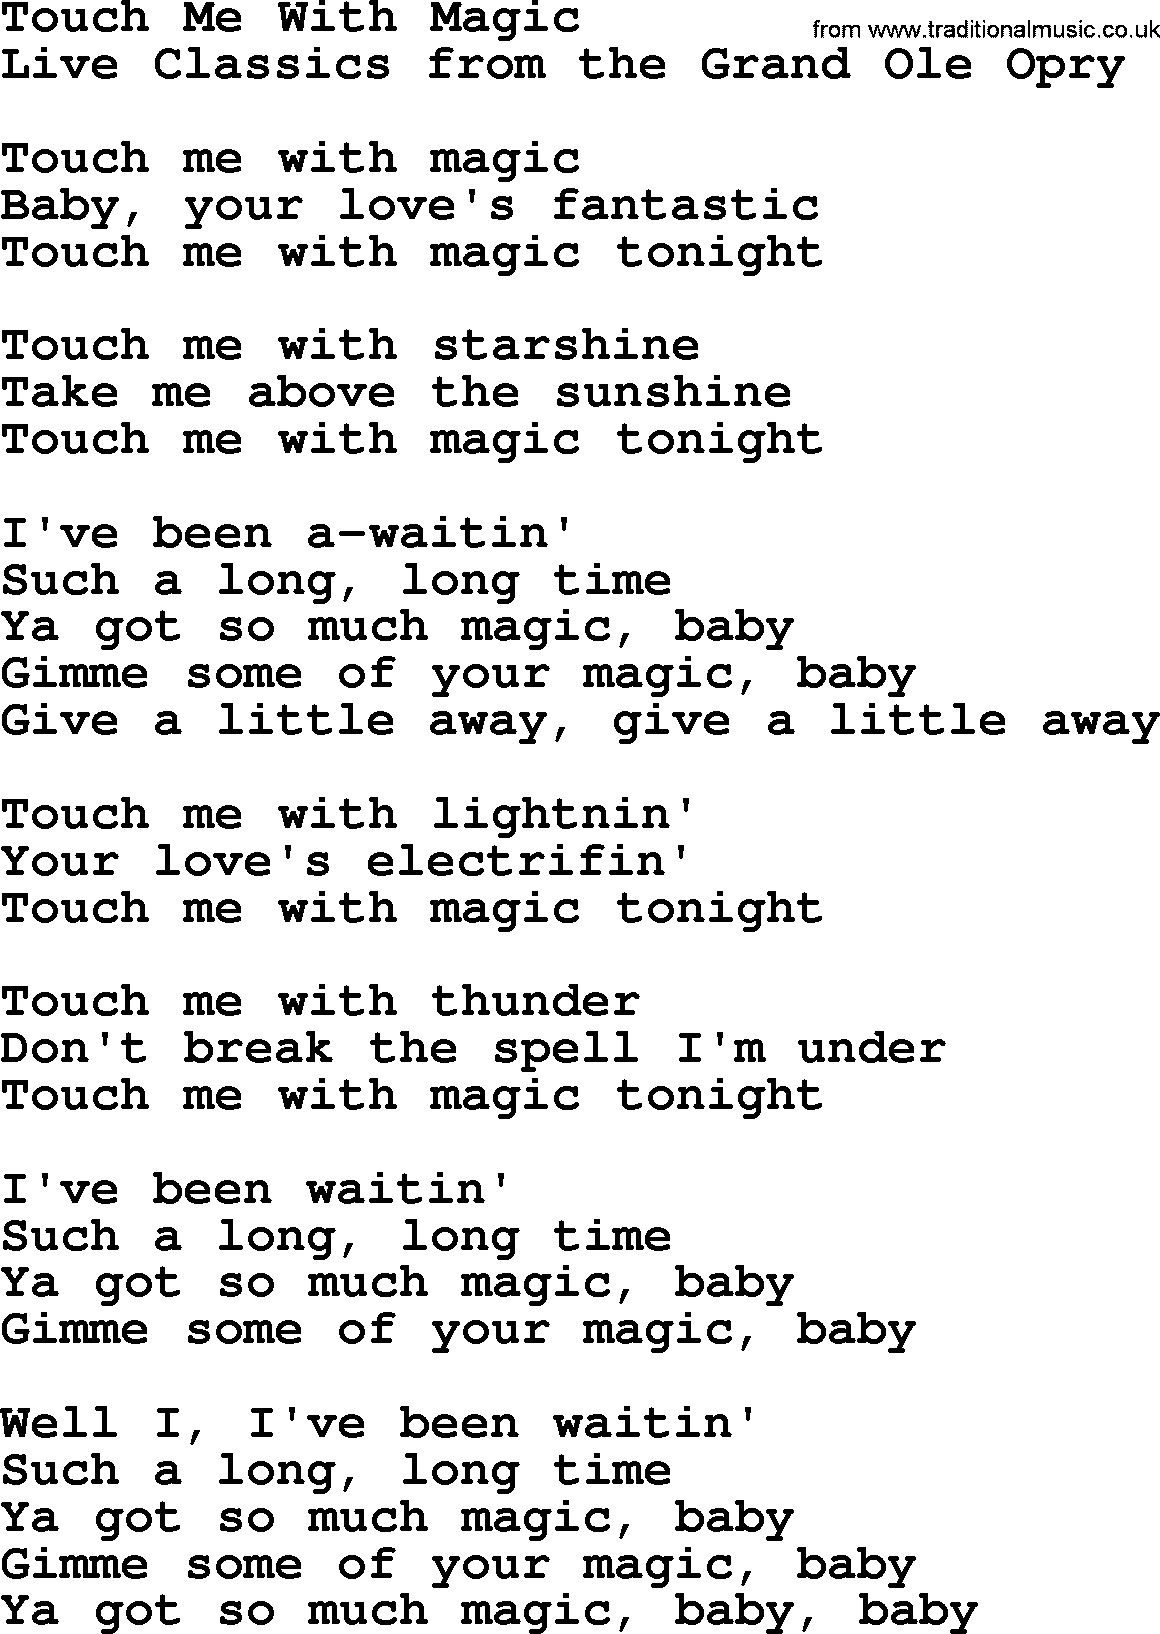 Marty Robbins song: Touch Me With Magic, lyrics